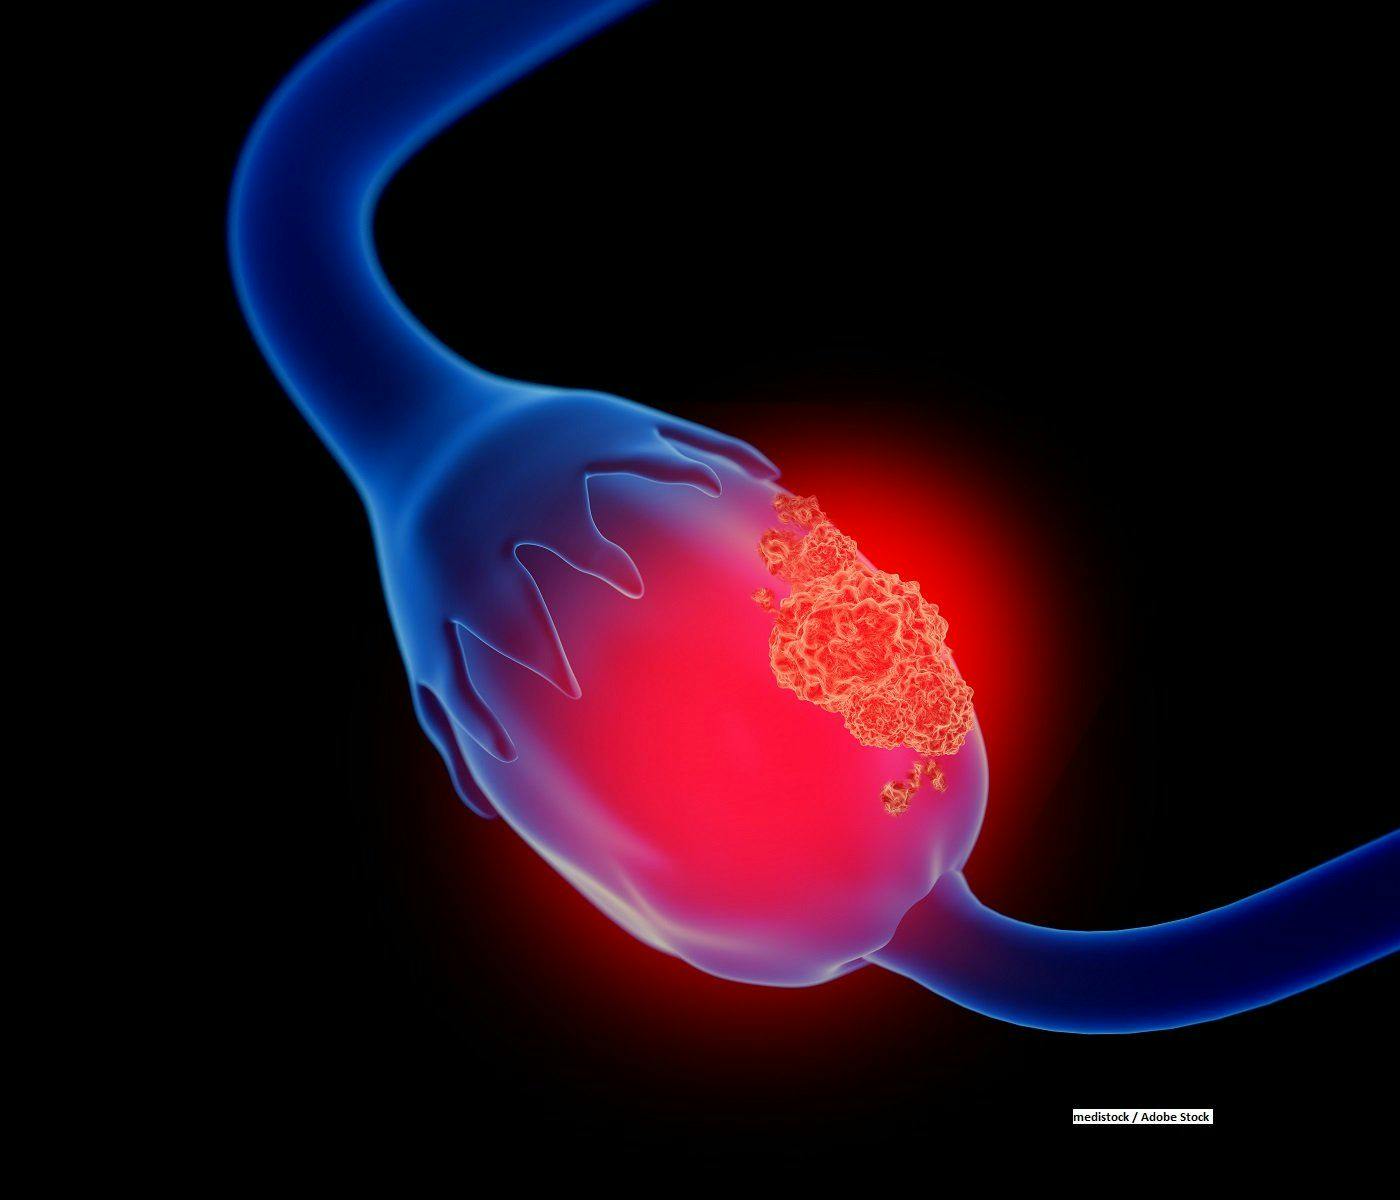 Olaparib Maintenance Therapy Improves Survival in Relapsed, BRCA-Positive Ovarian Cancer